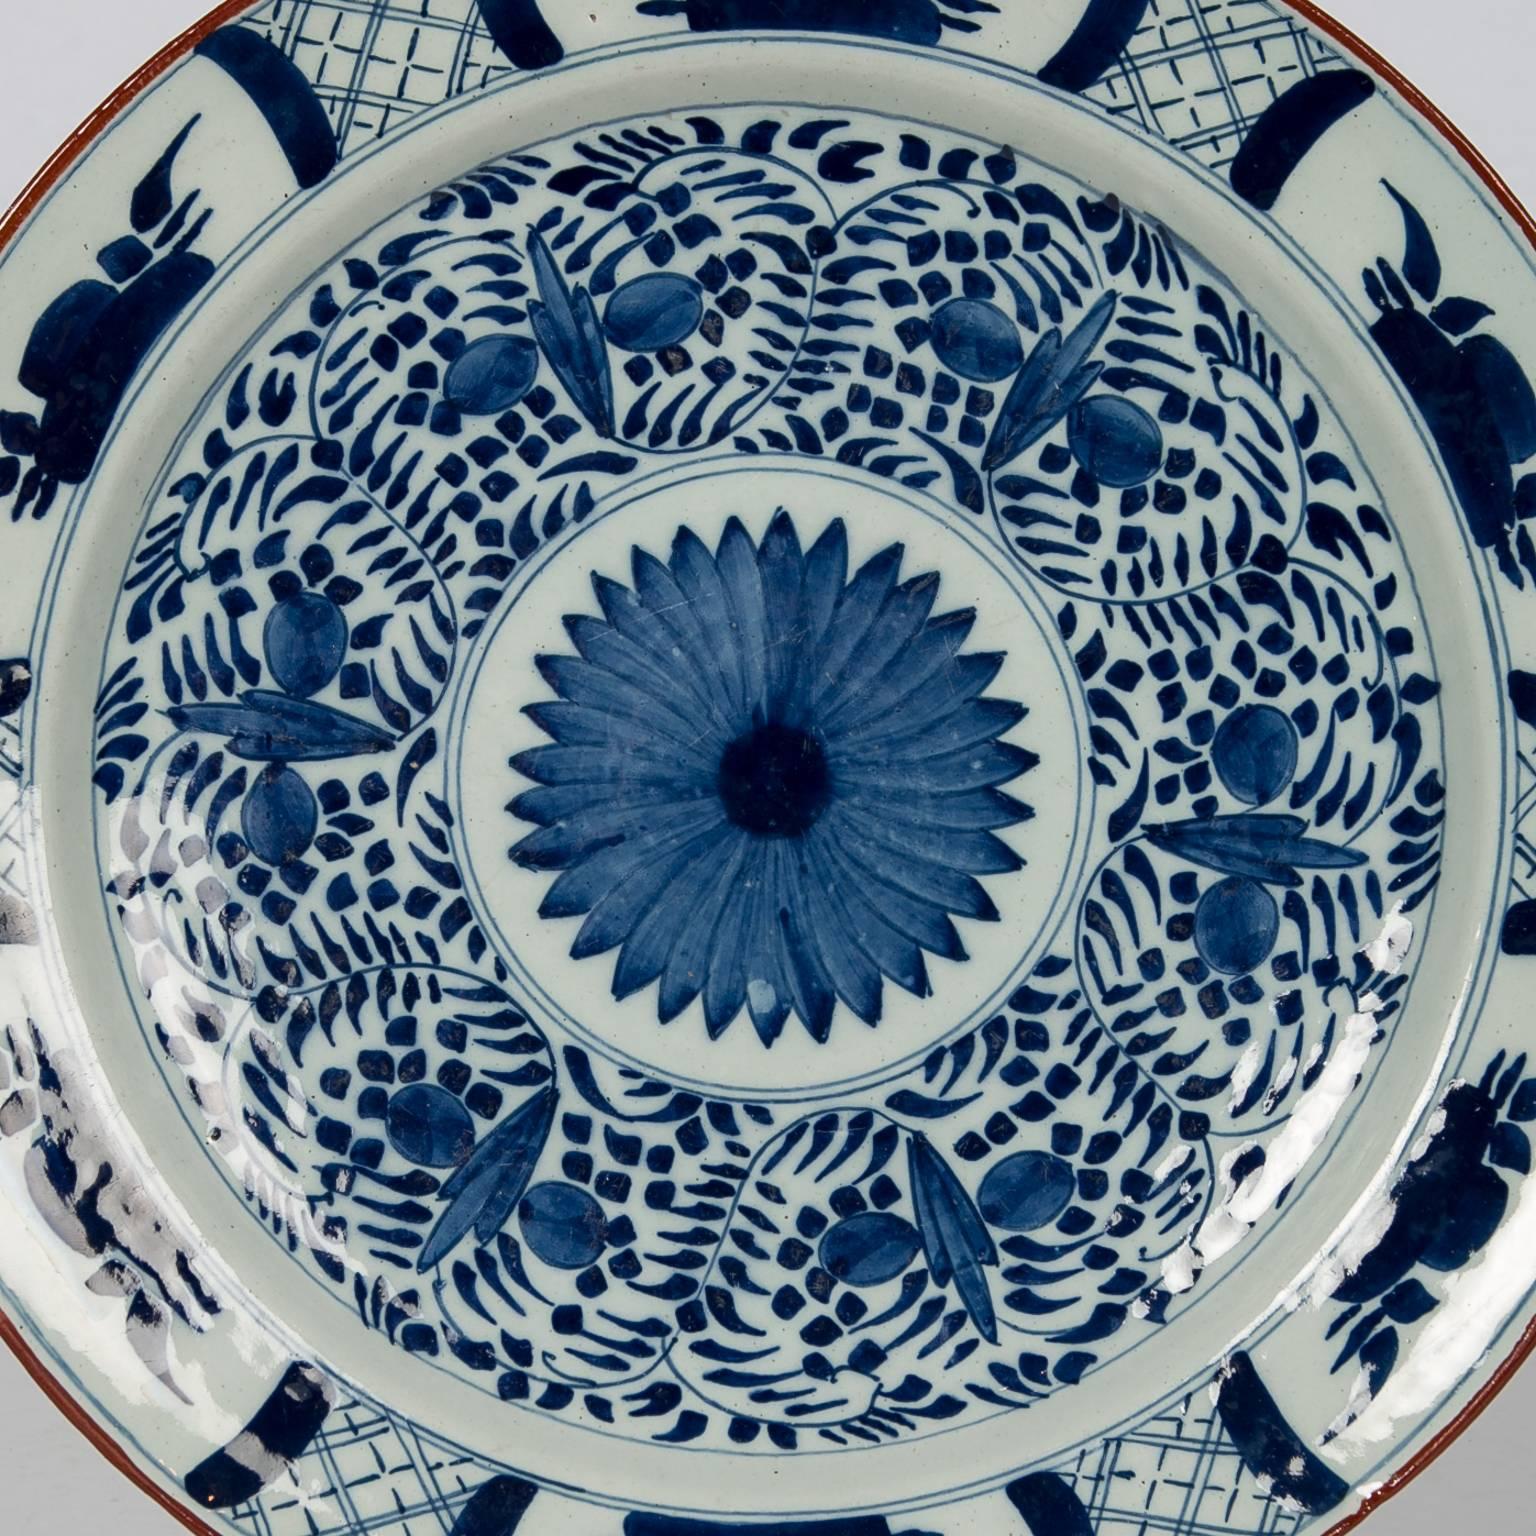 A large Dutch delft blue and white charger with deep cobalt blue decoration. The charger features a large chrysanthemum in the center around which are scrolling vines and tulip buds. Along the border are naive floral designs painted in the flat leaf